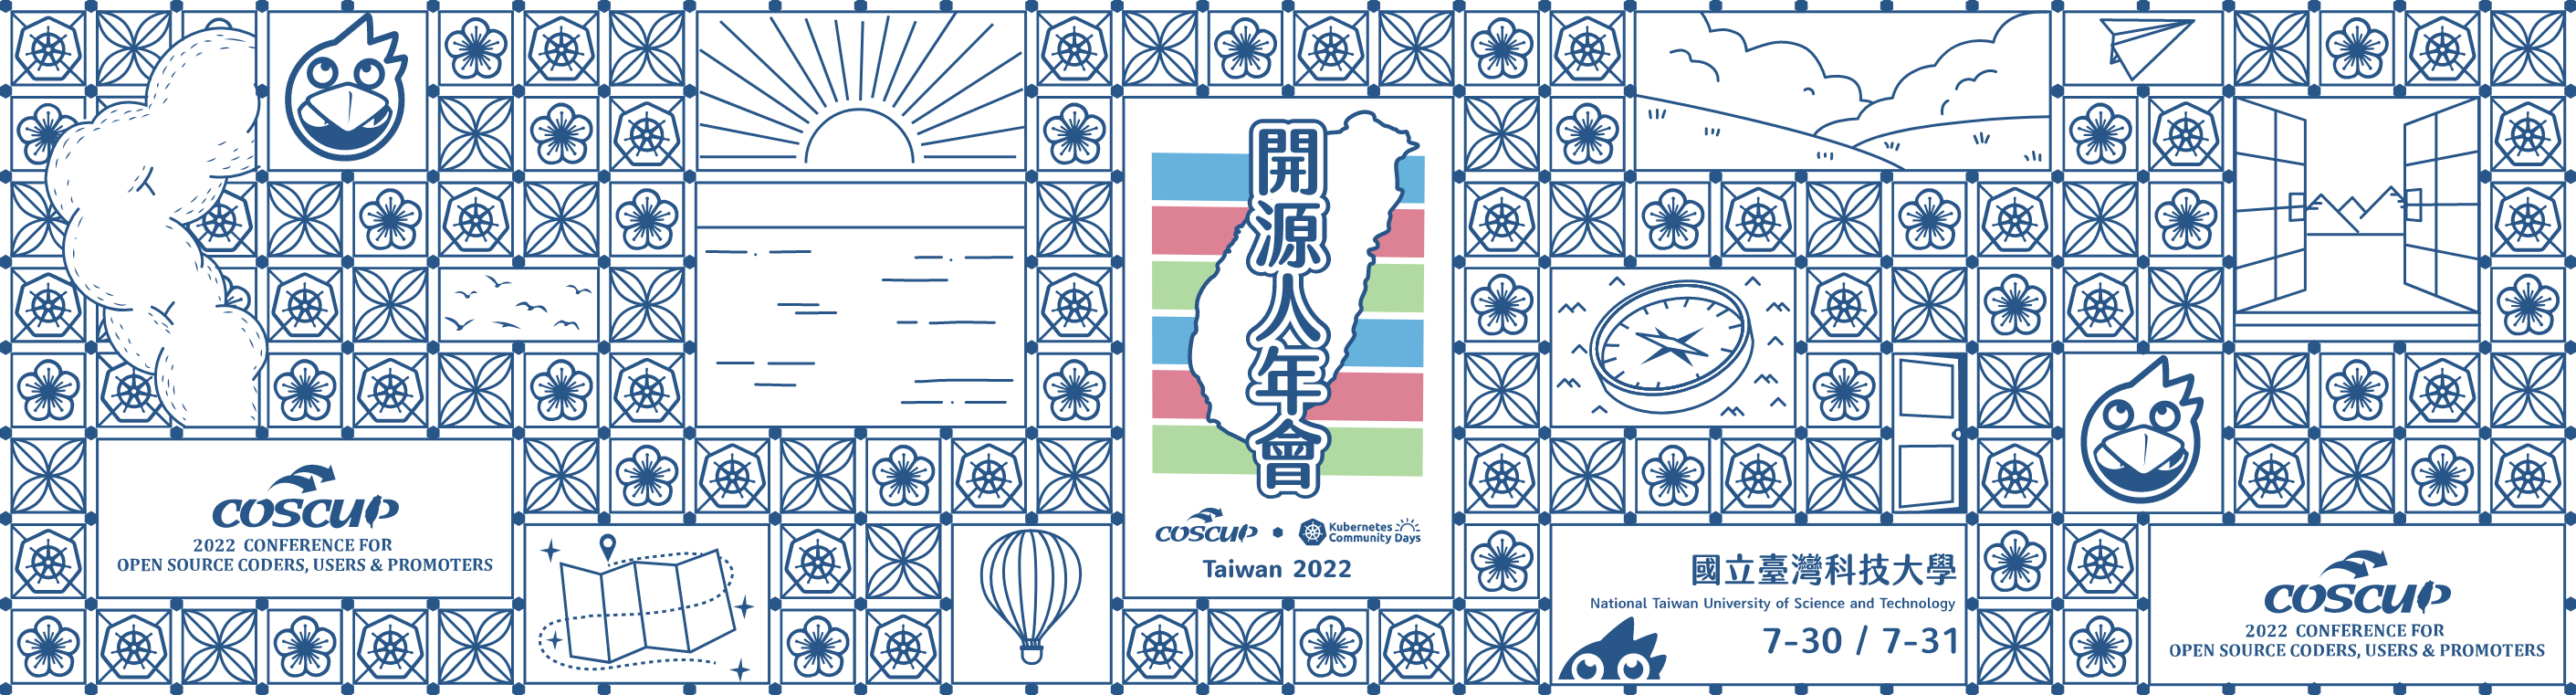 COSCUP x KCD Taiwan 2022 Logo